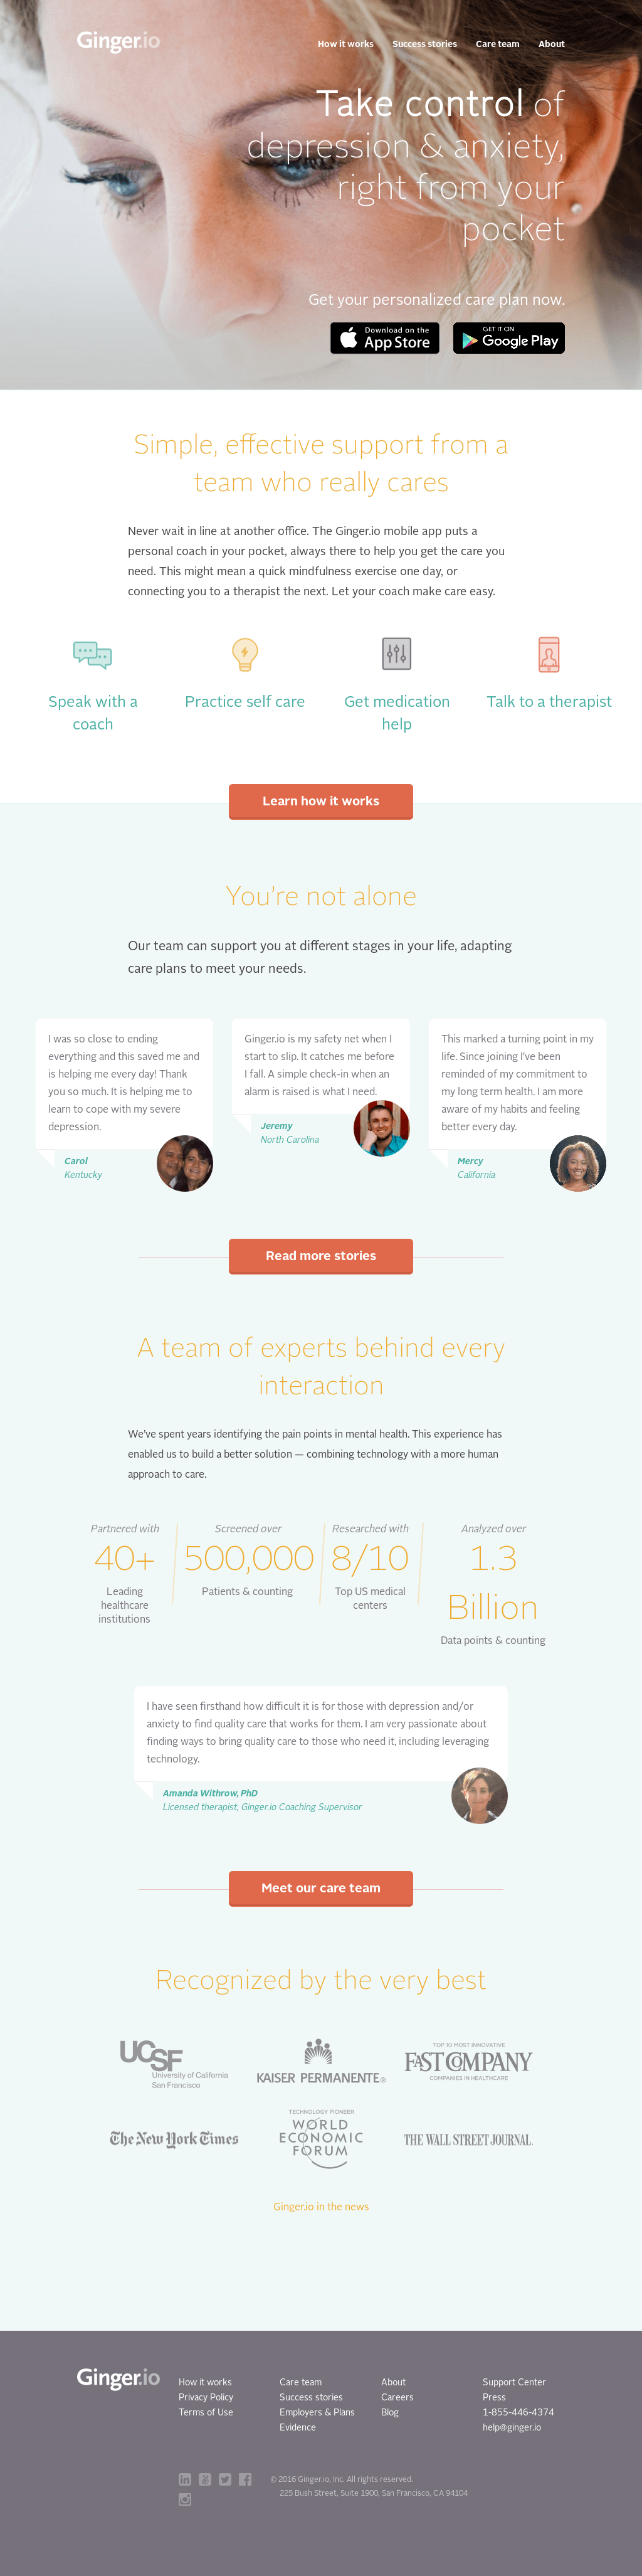 Ginger.io Logo - Ginger.io Competitors, Revenue and Employees - Owler Company Profile